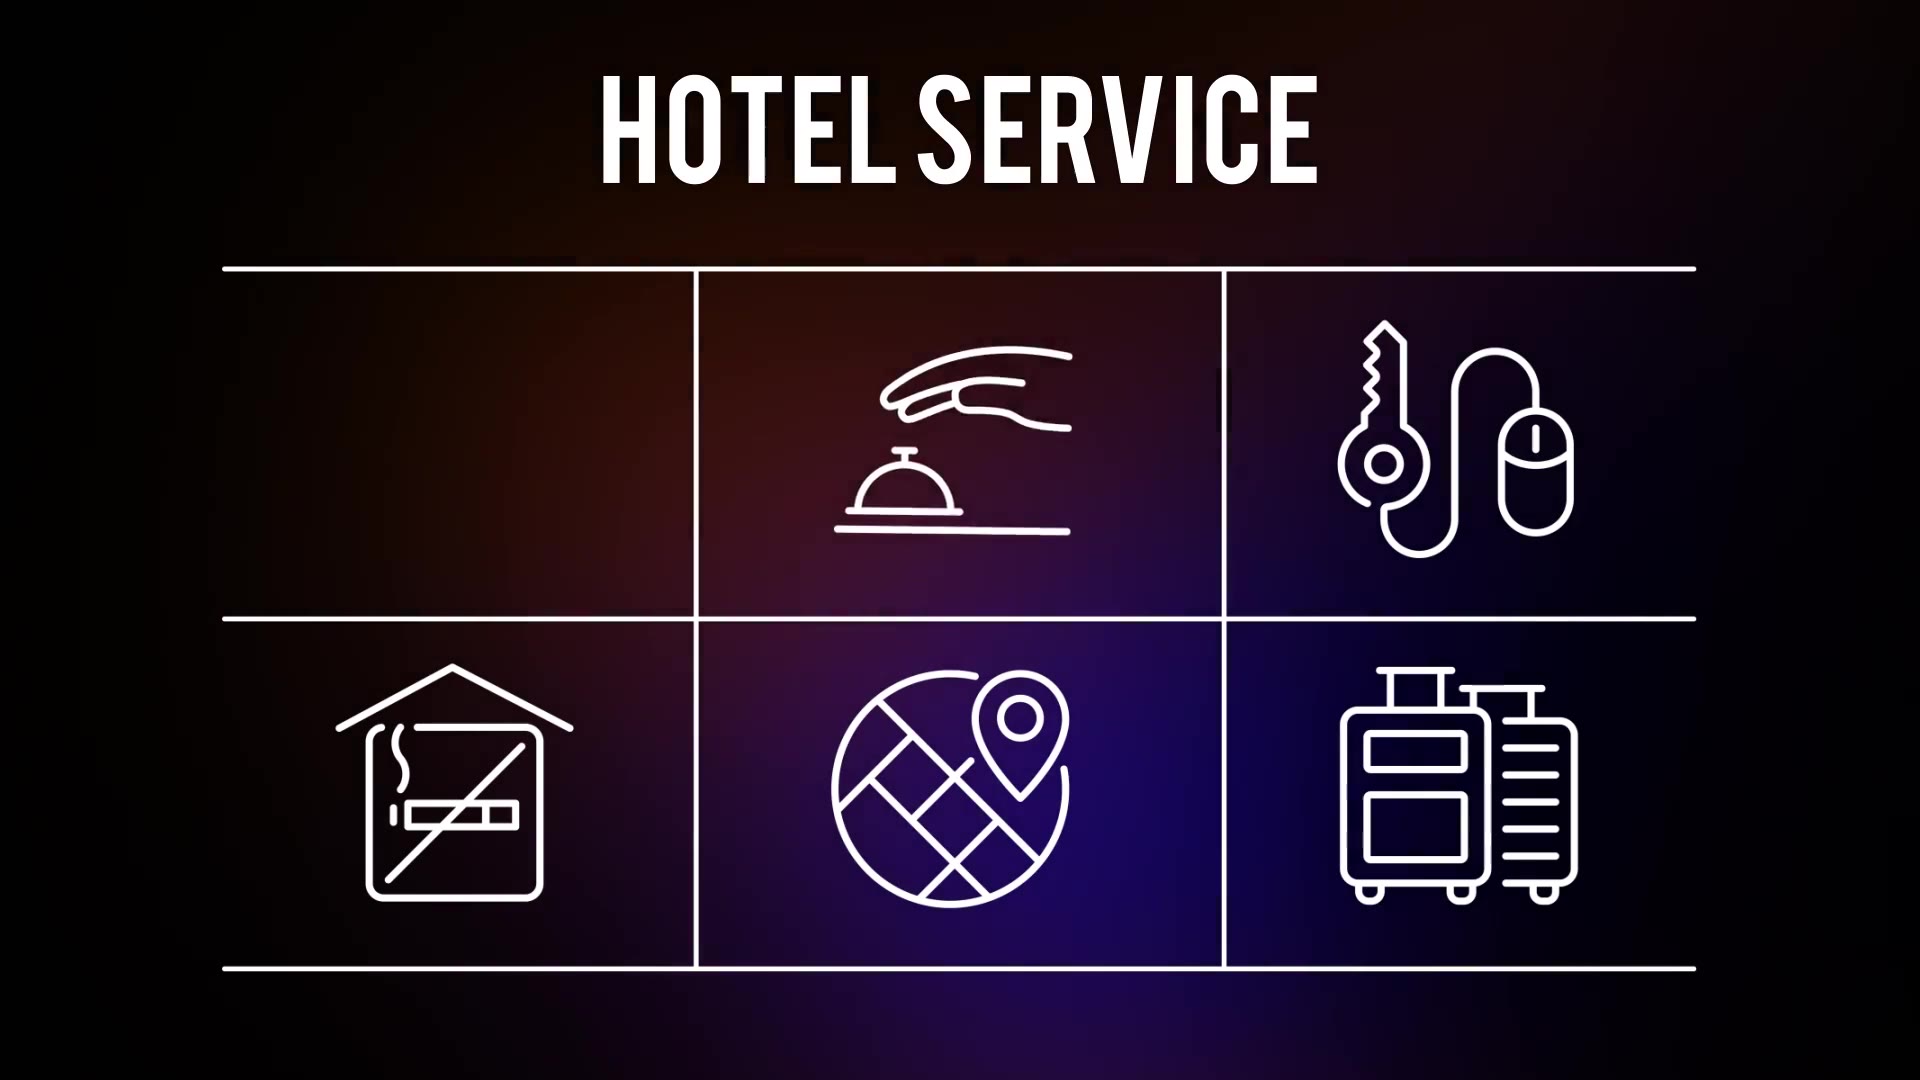 Hotel Service 25 Outline Icons - Download Videohive 23195011